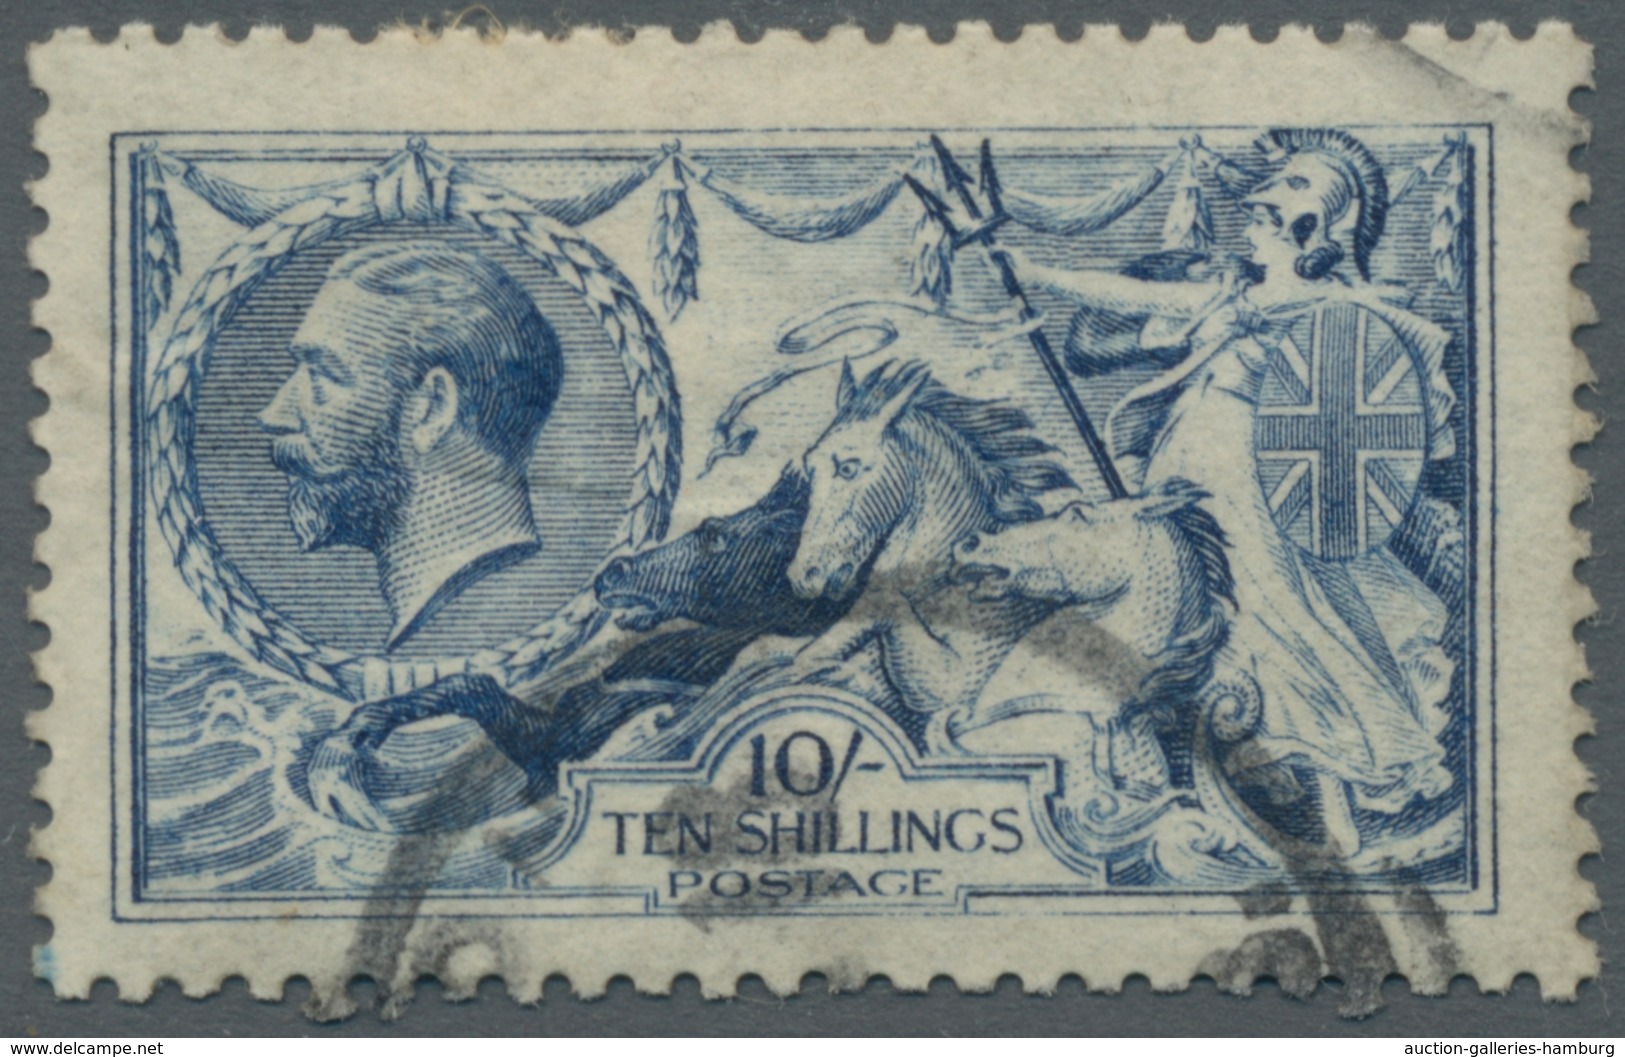 Großbritannien: 1911-1935, George V period, special collection in used condition, presented in a sel